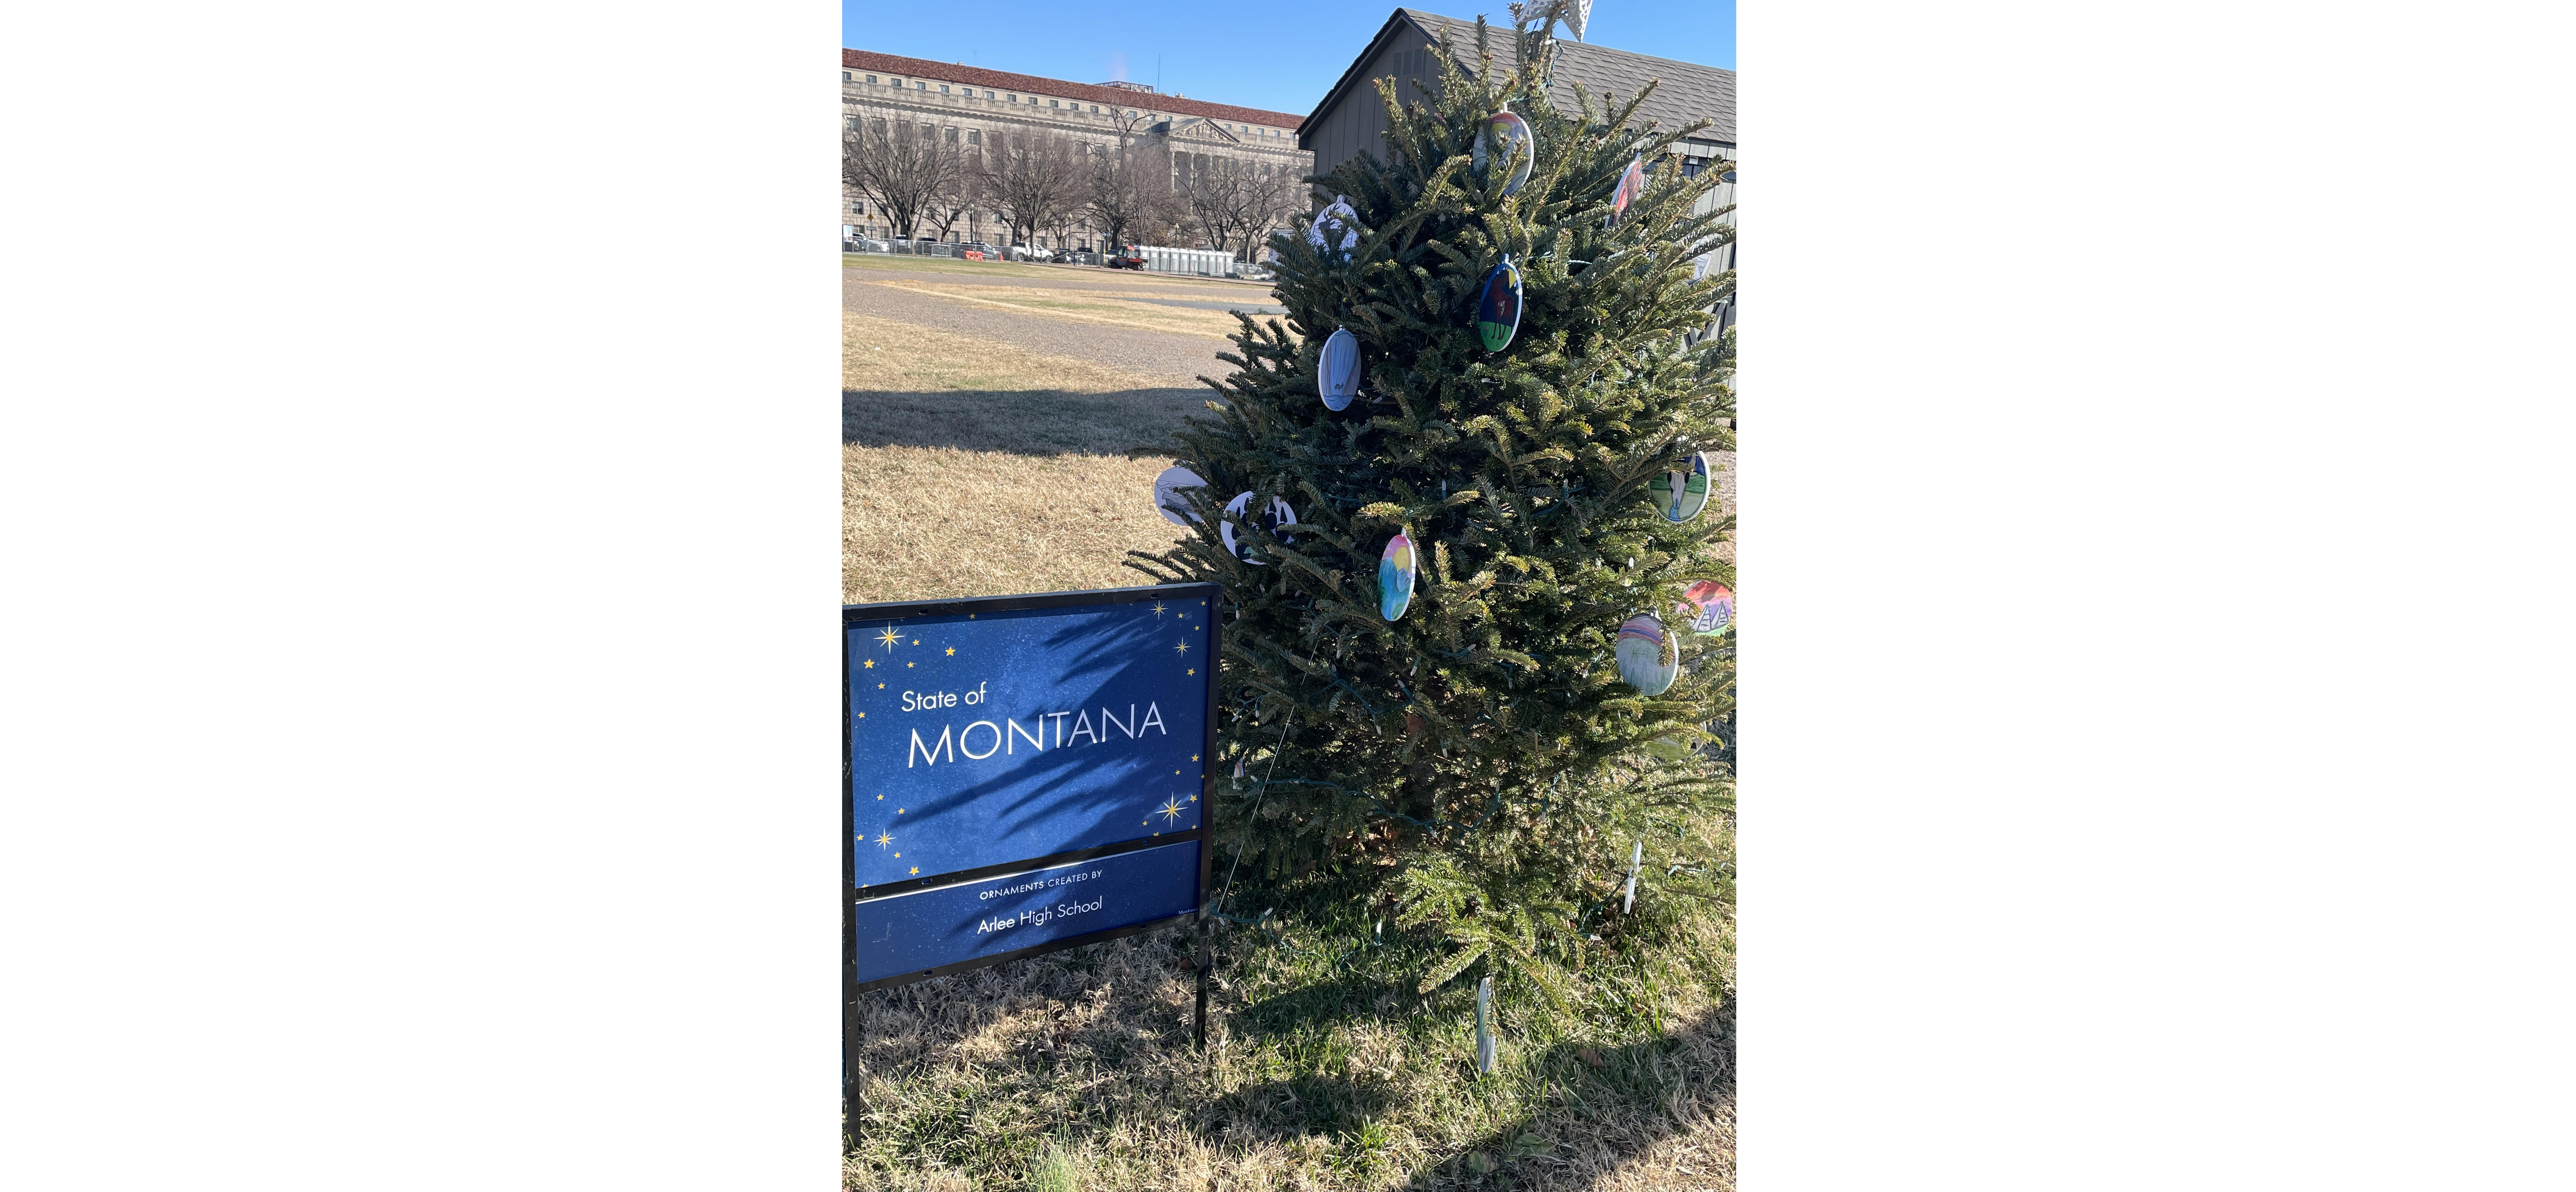 Montana Christmas Tree in DC, Ornaments by Arlee High School